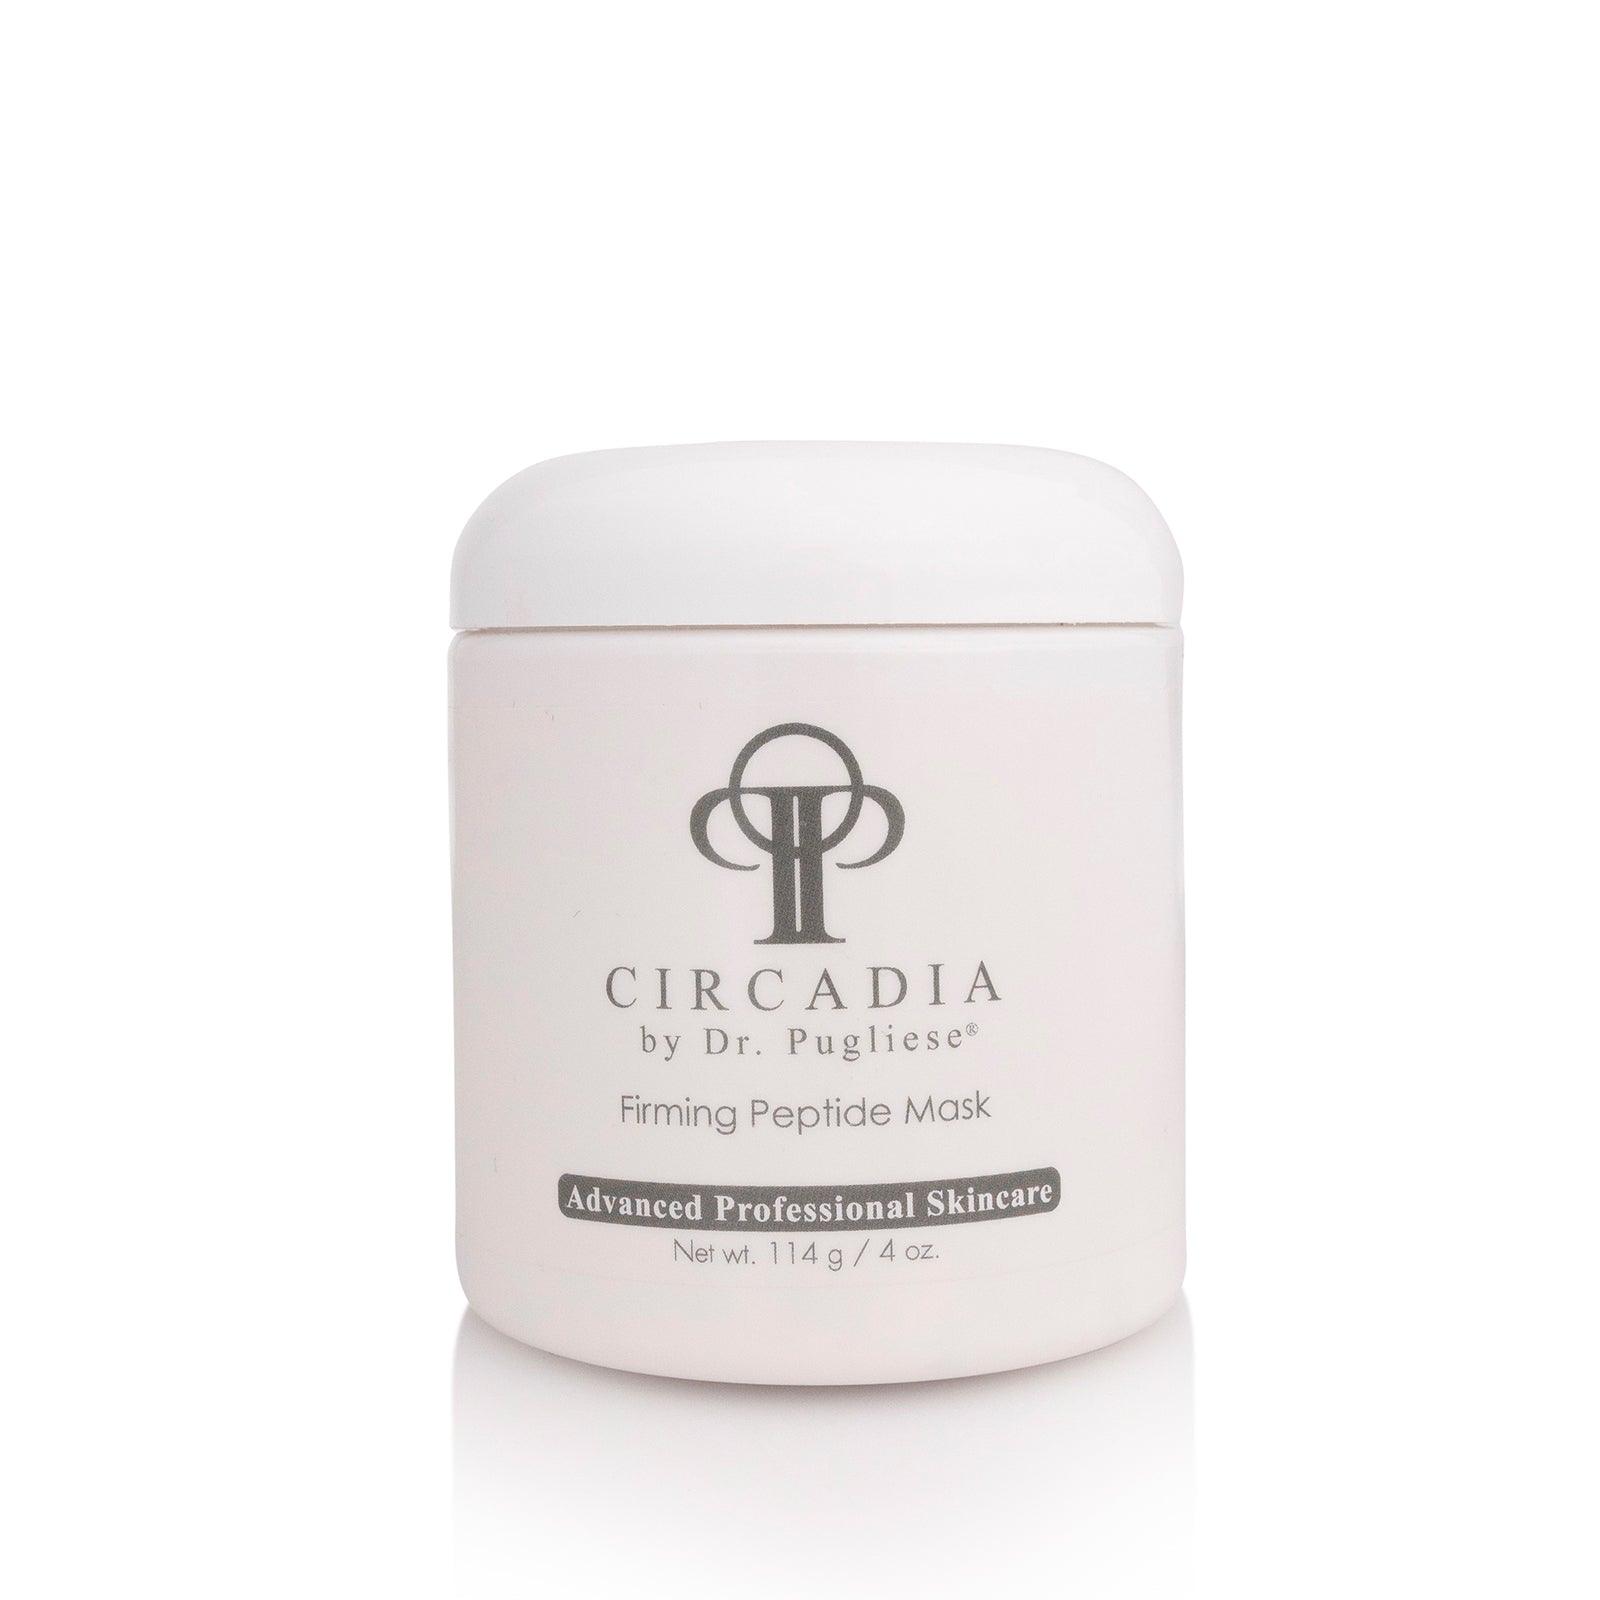 Firming Peptide Mask - CIRCADIA